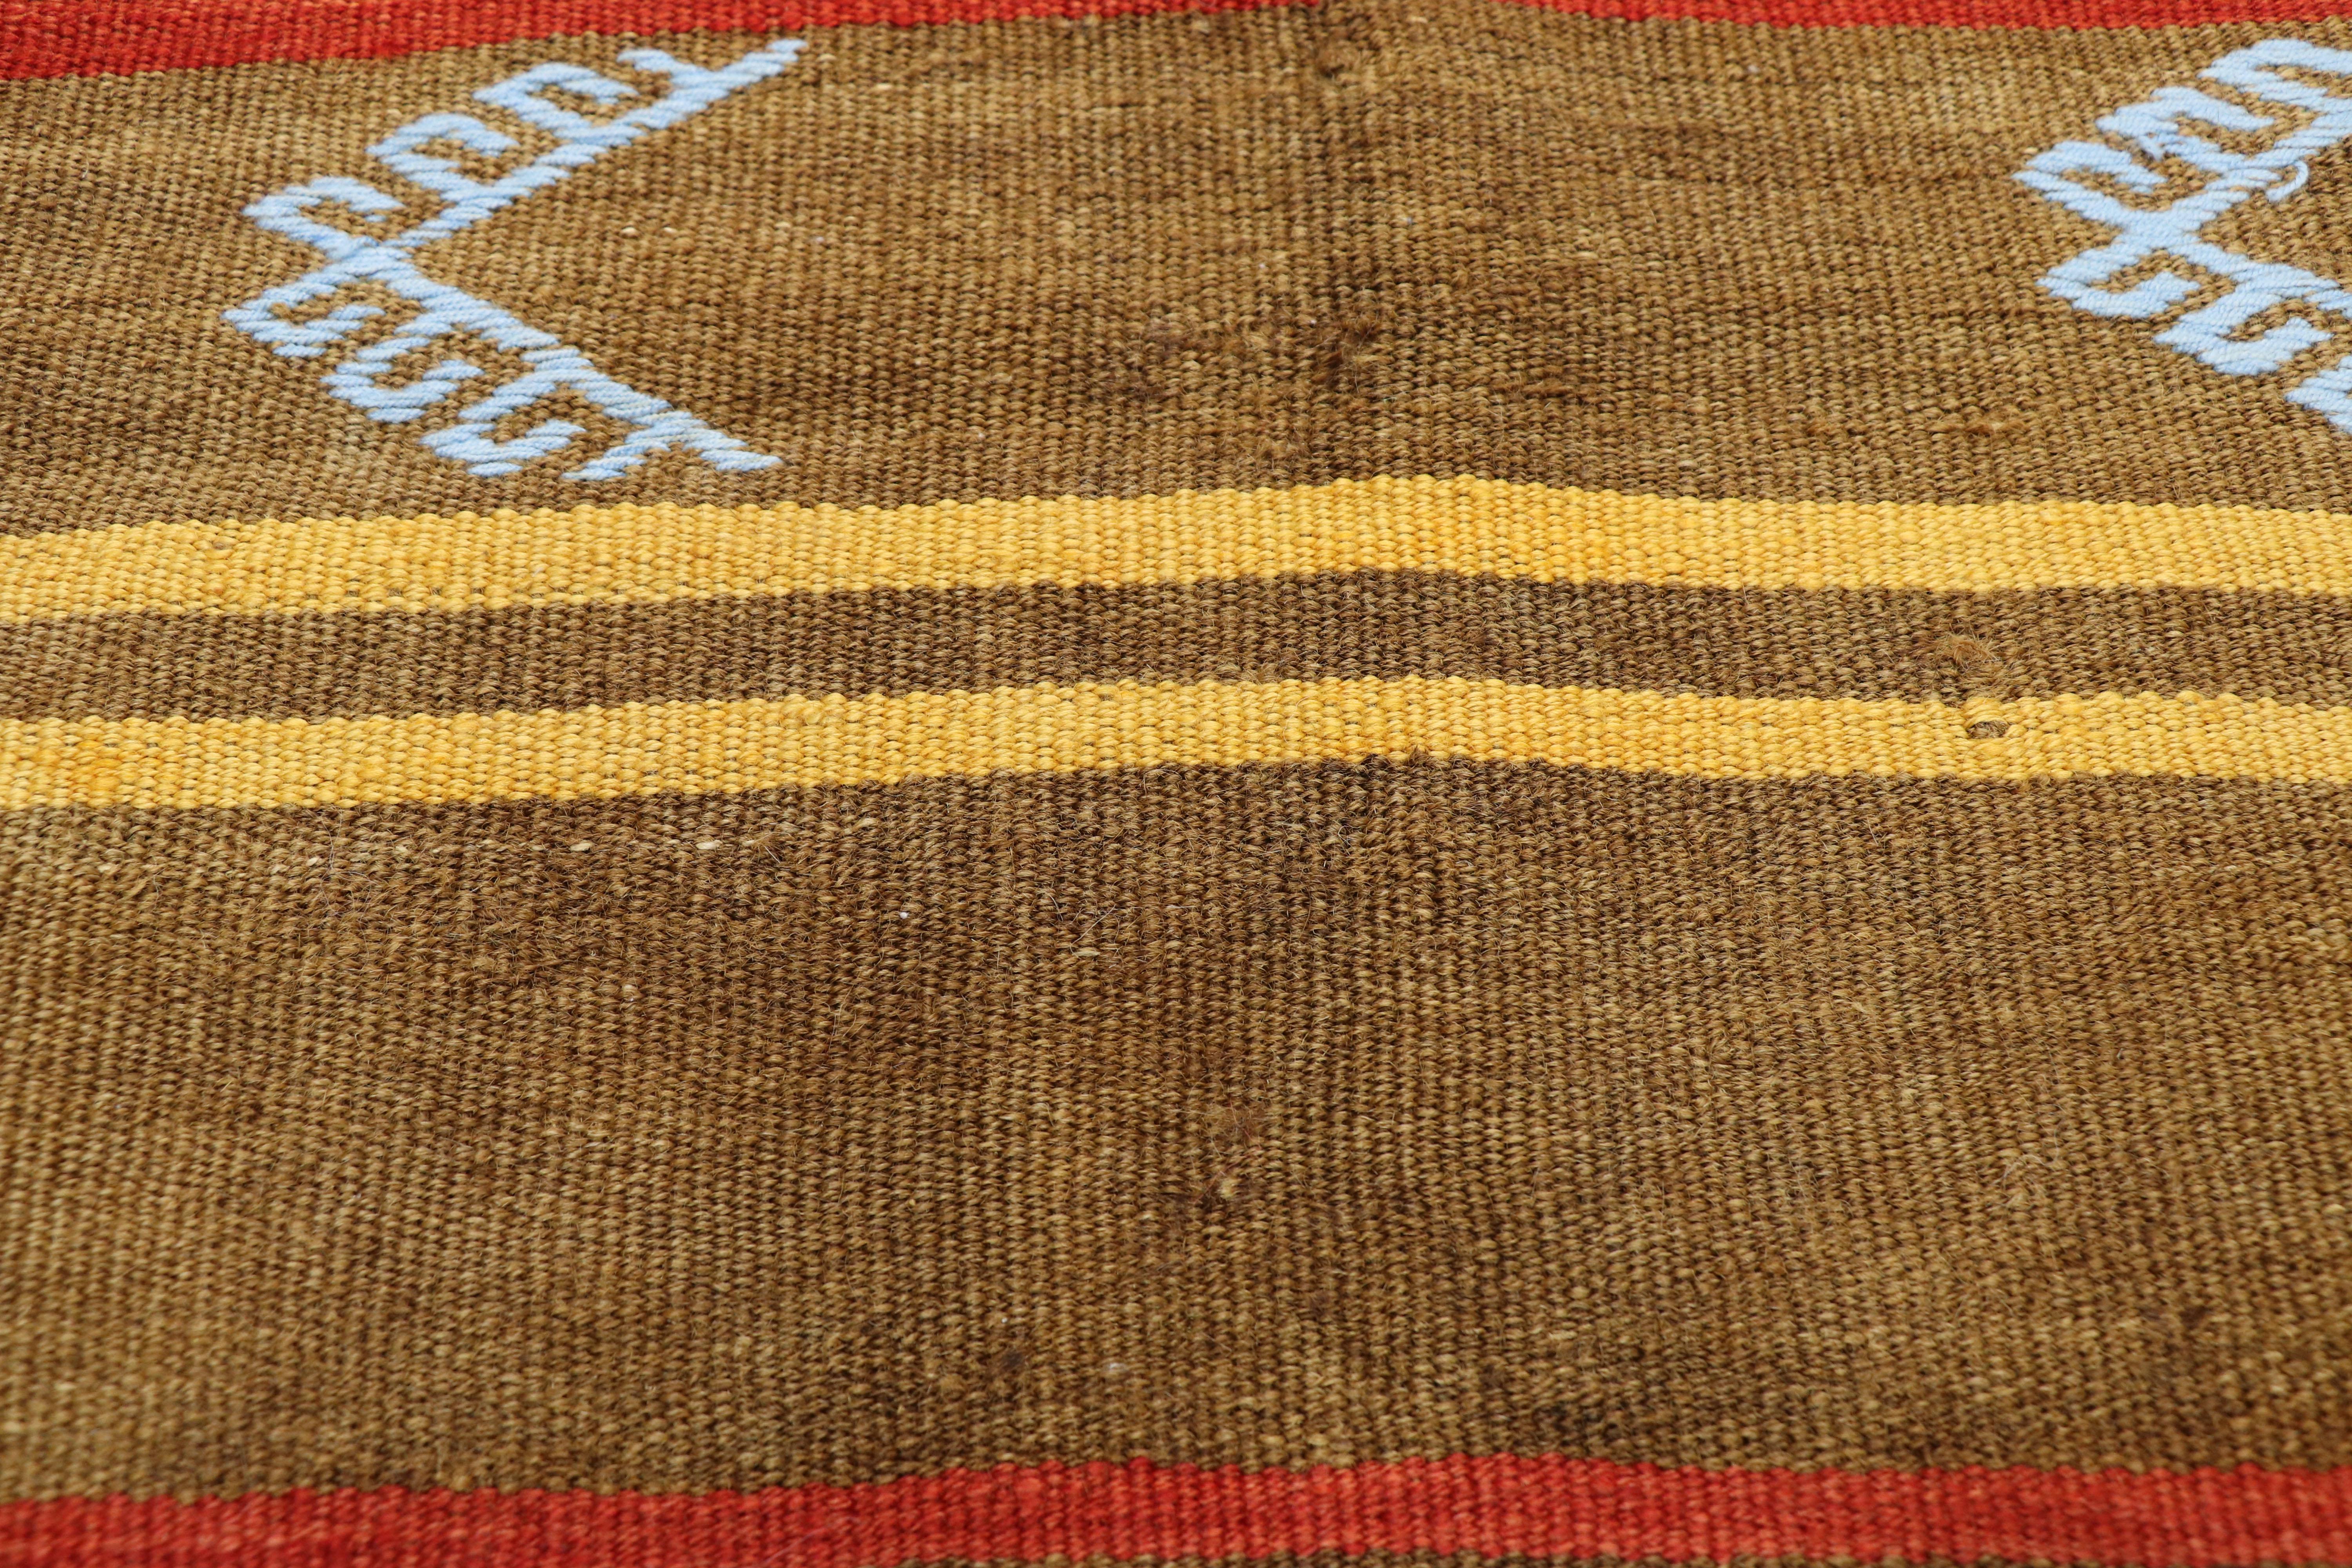 Vintage Turkish Kilim Rug with Bohemian Tribal Design and Modern Cabin Style In Good Condition For Sale In Dallas, TX